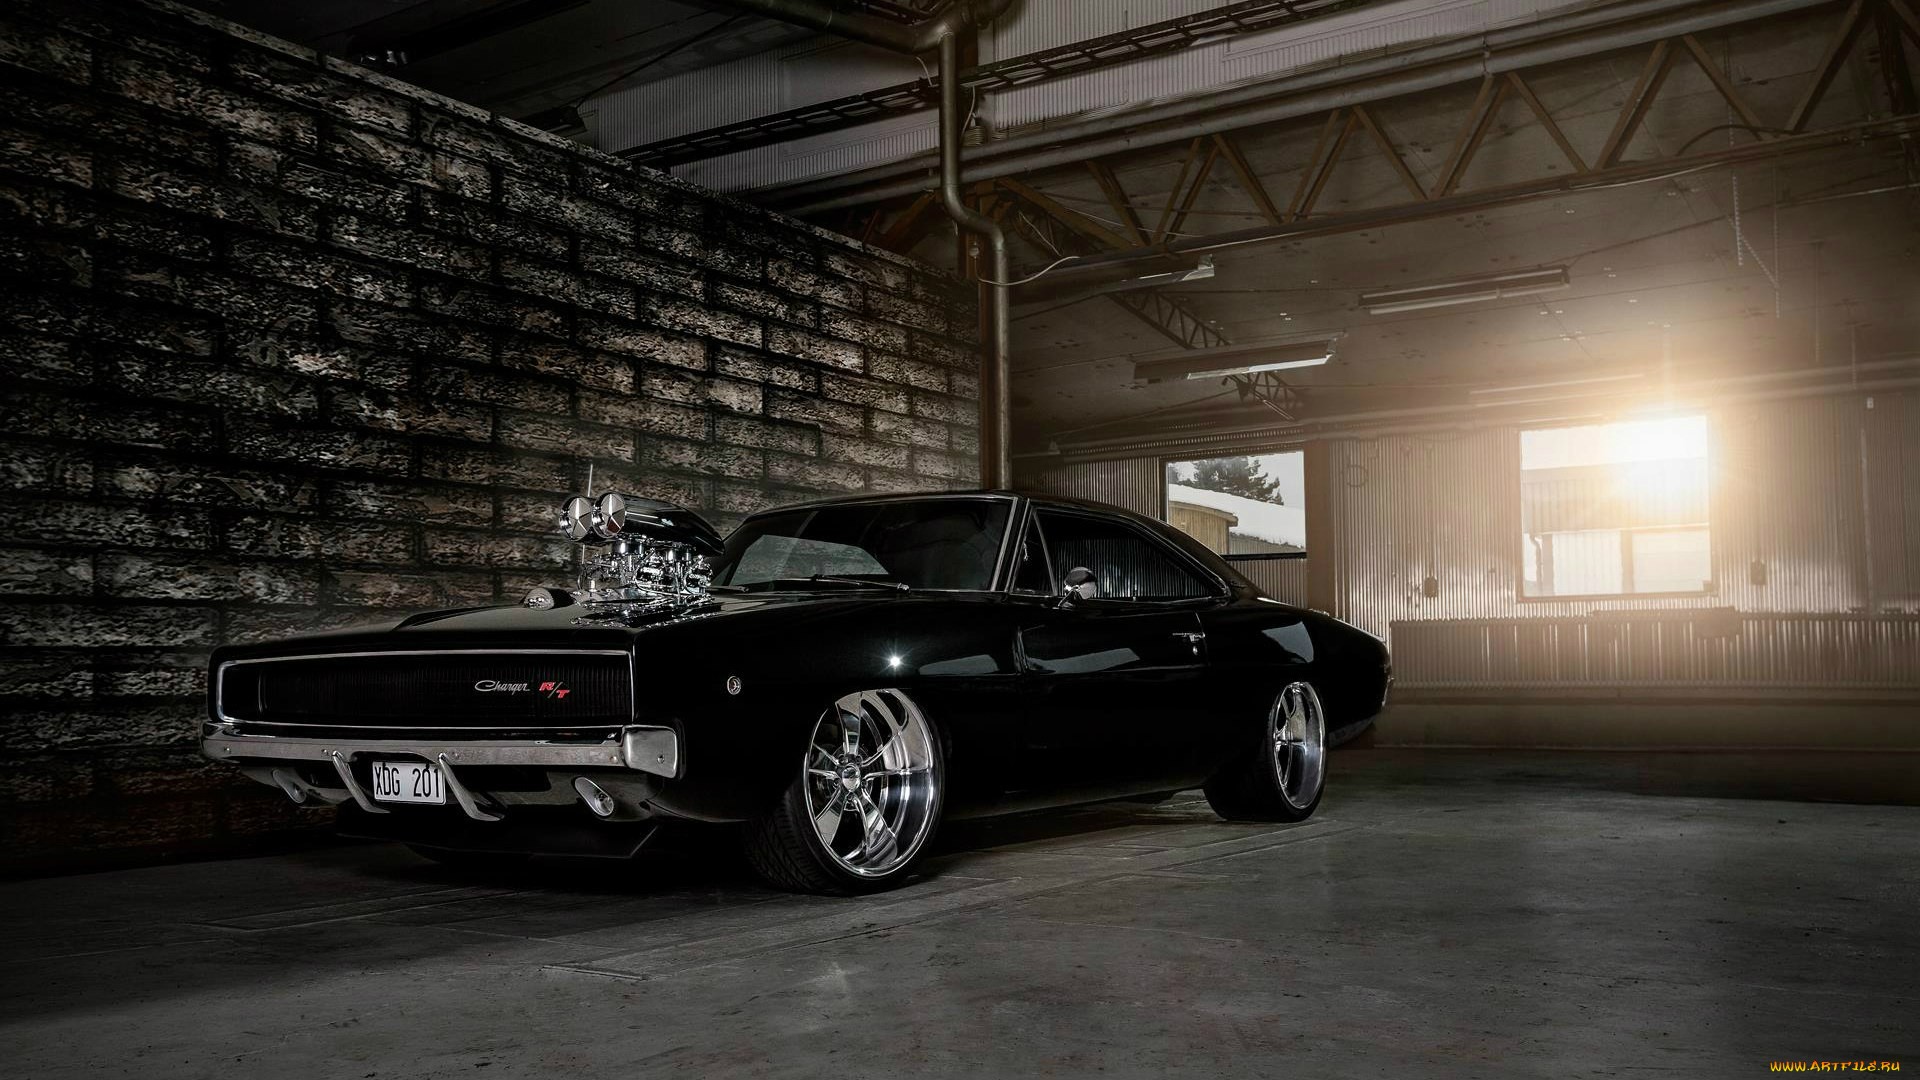 Dodge Charger Rt Wallpaper